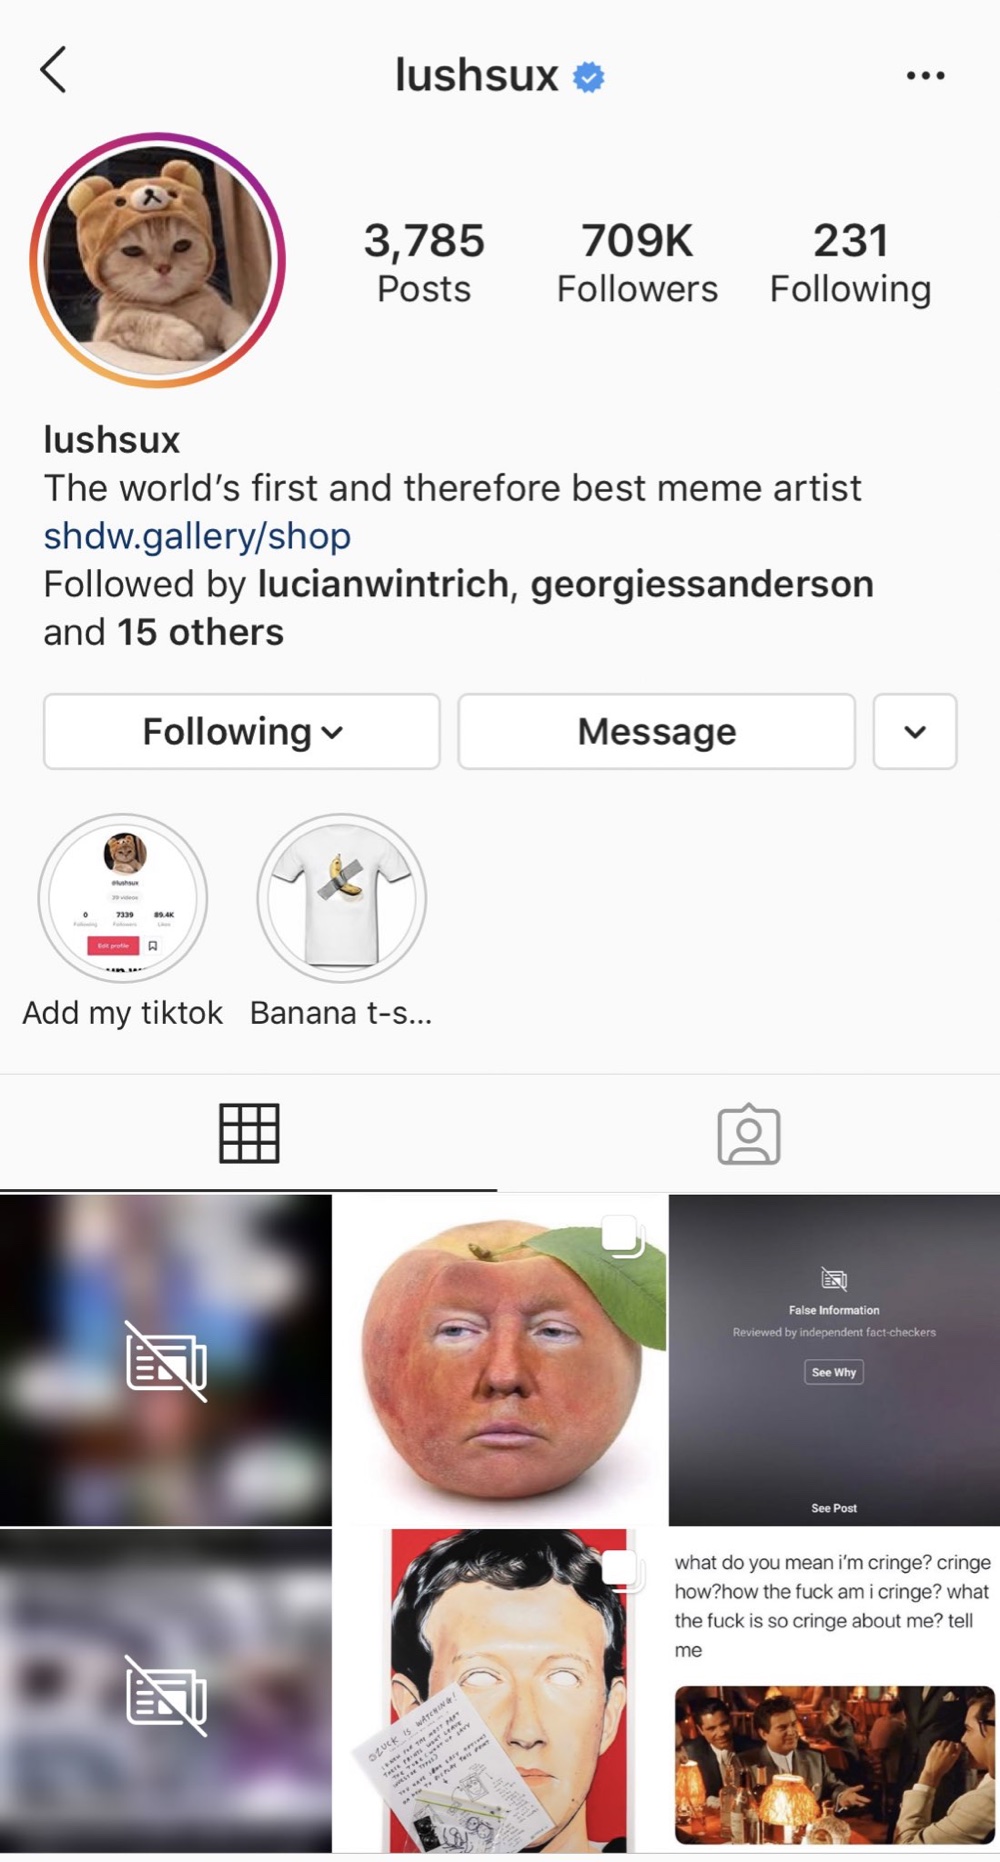 Half of the most recent memes on the lushsux Instagram page are now hidden behind fact-check notices (Instagram - @lushsux)